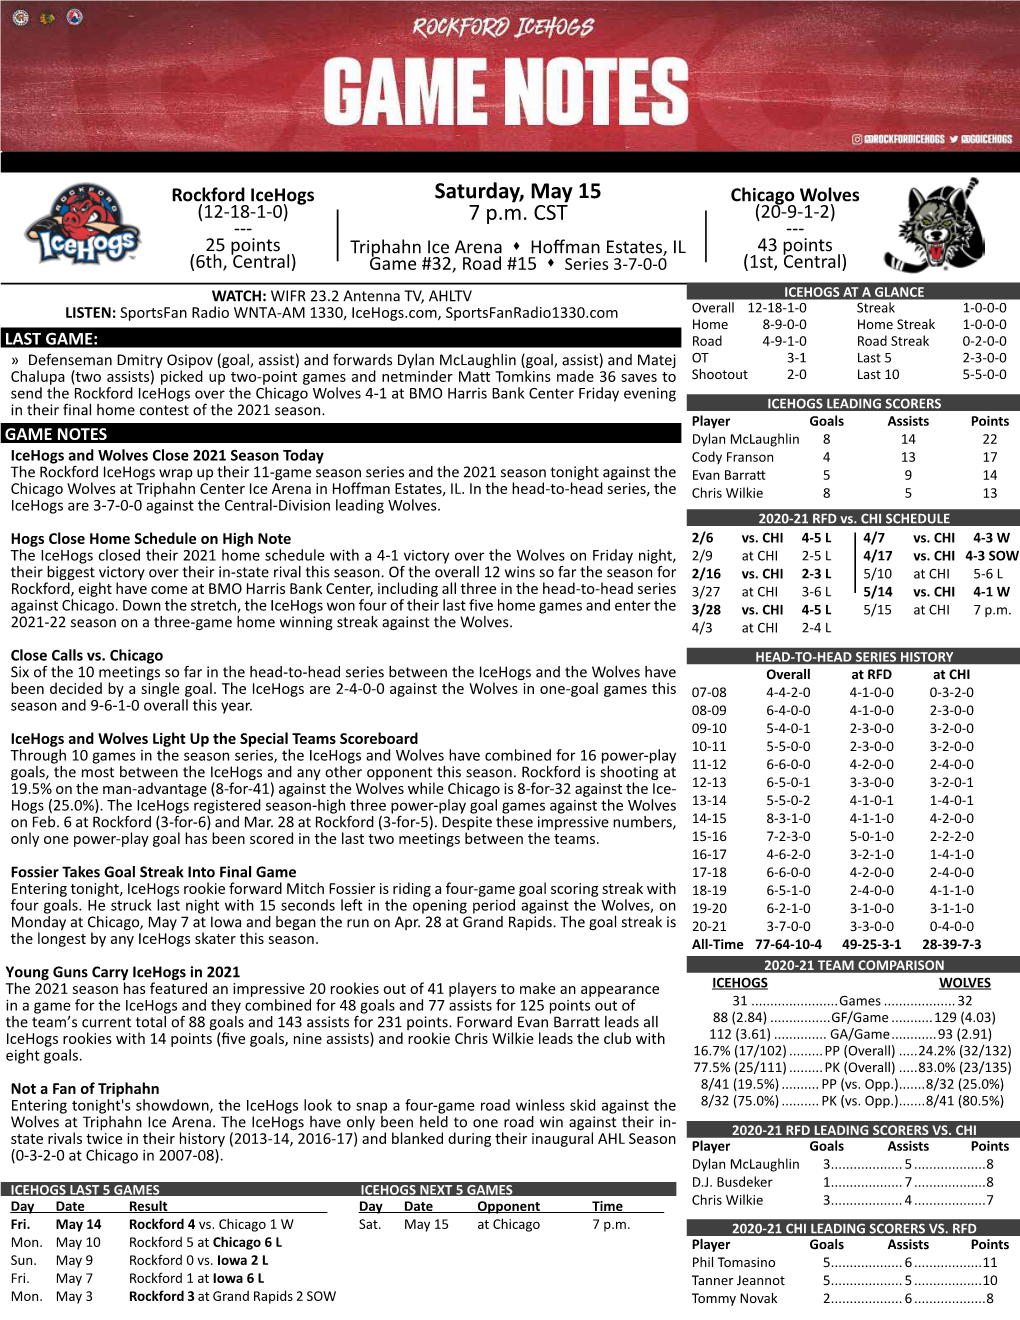 Icehogs Saturday, May 15 Chicago Wolves (12-18-1-0) 7 P.M